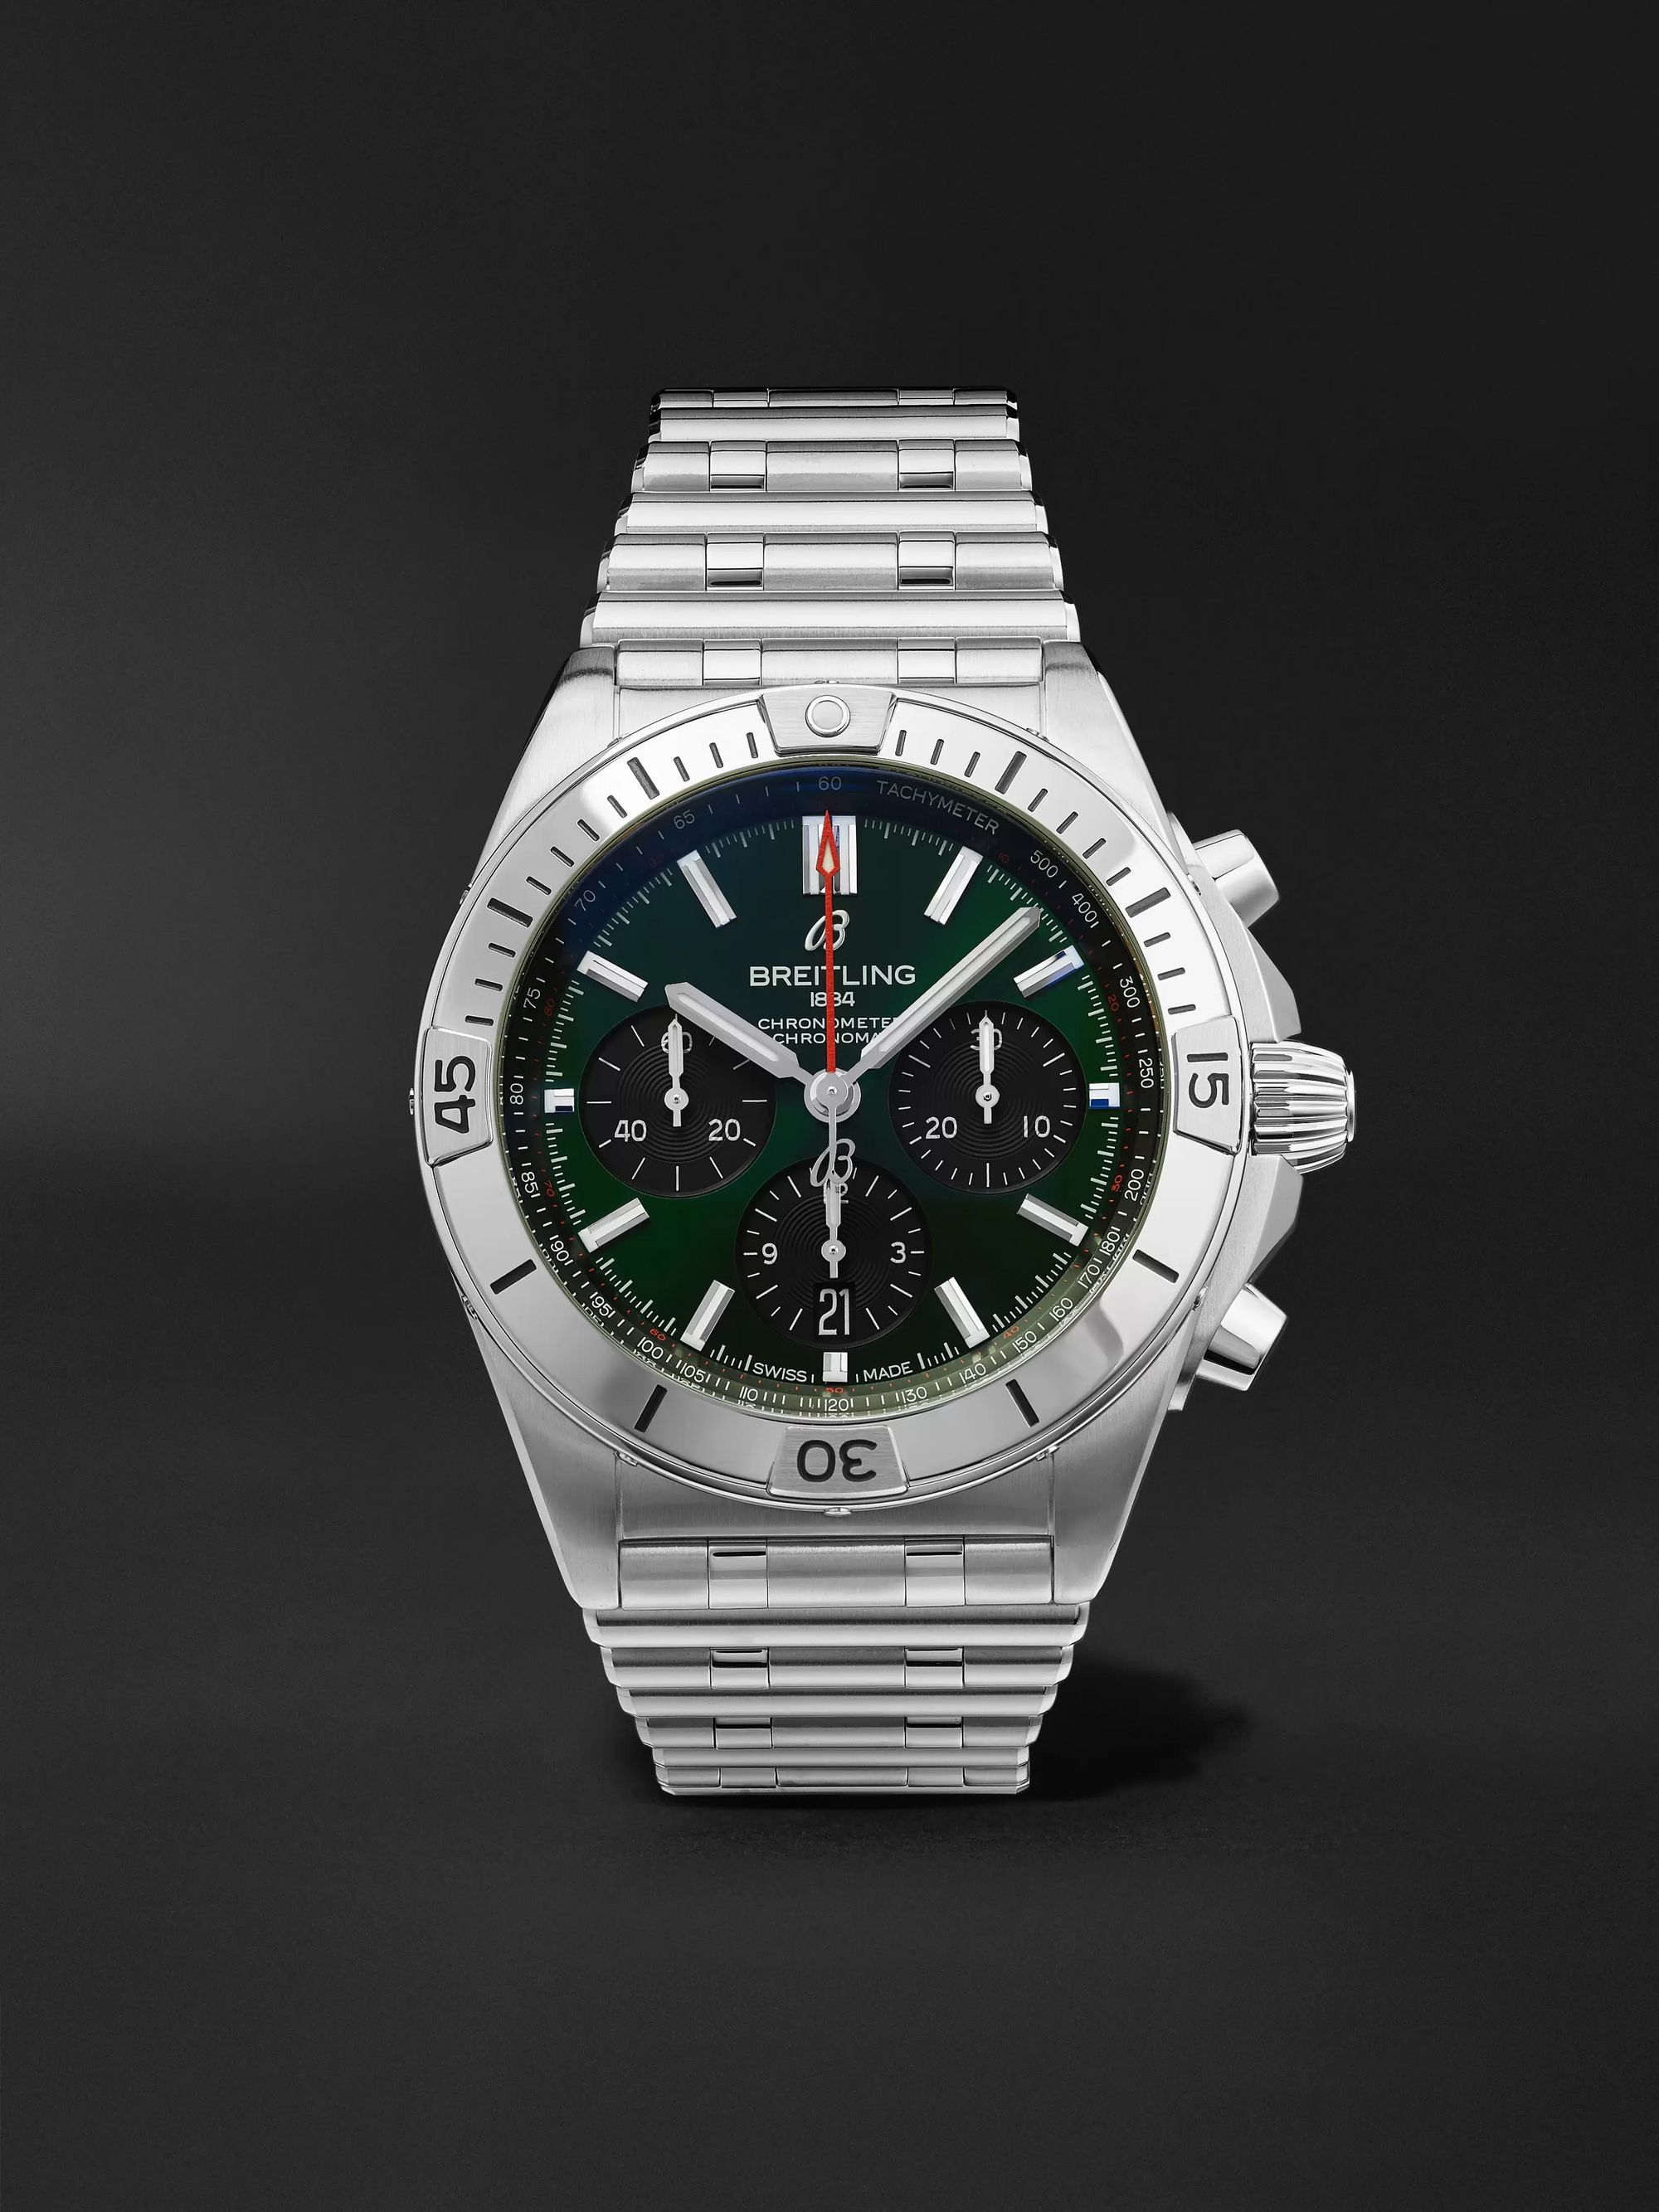 BREITLING Chronomat B01 Bentley Edition Automatic Chronograph 42mm Stainless Steel Watch, Ref. No. AB01343A1L1A1